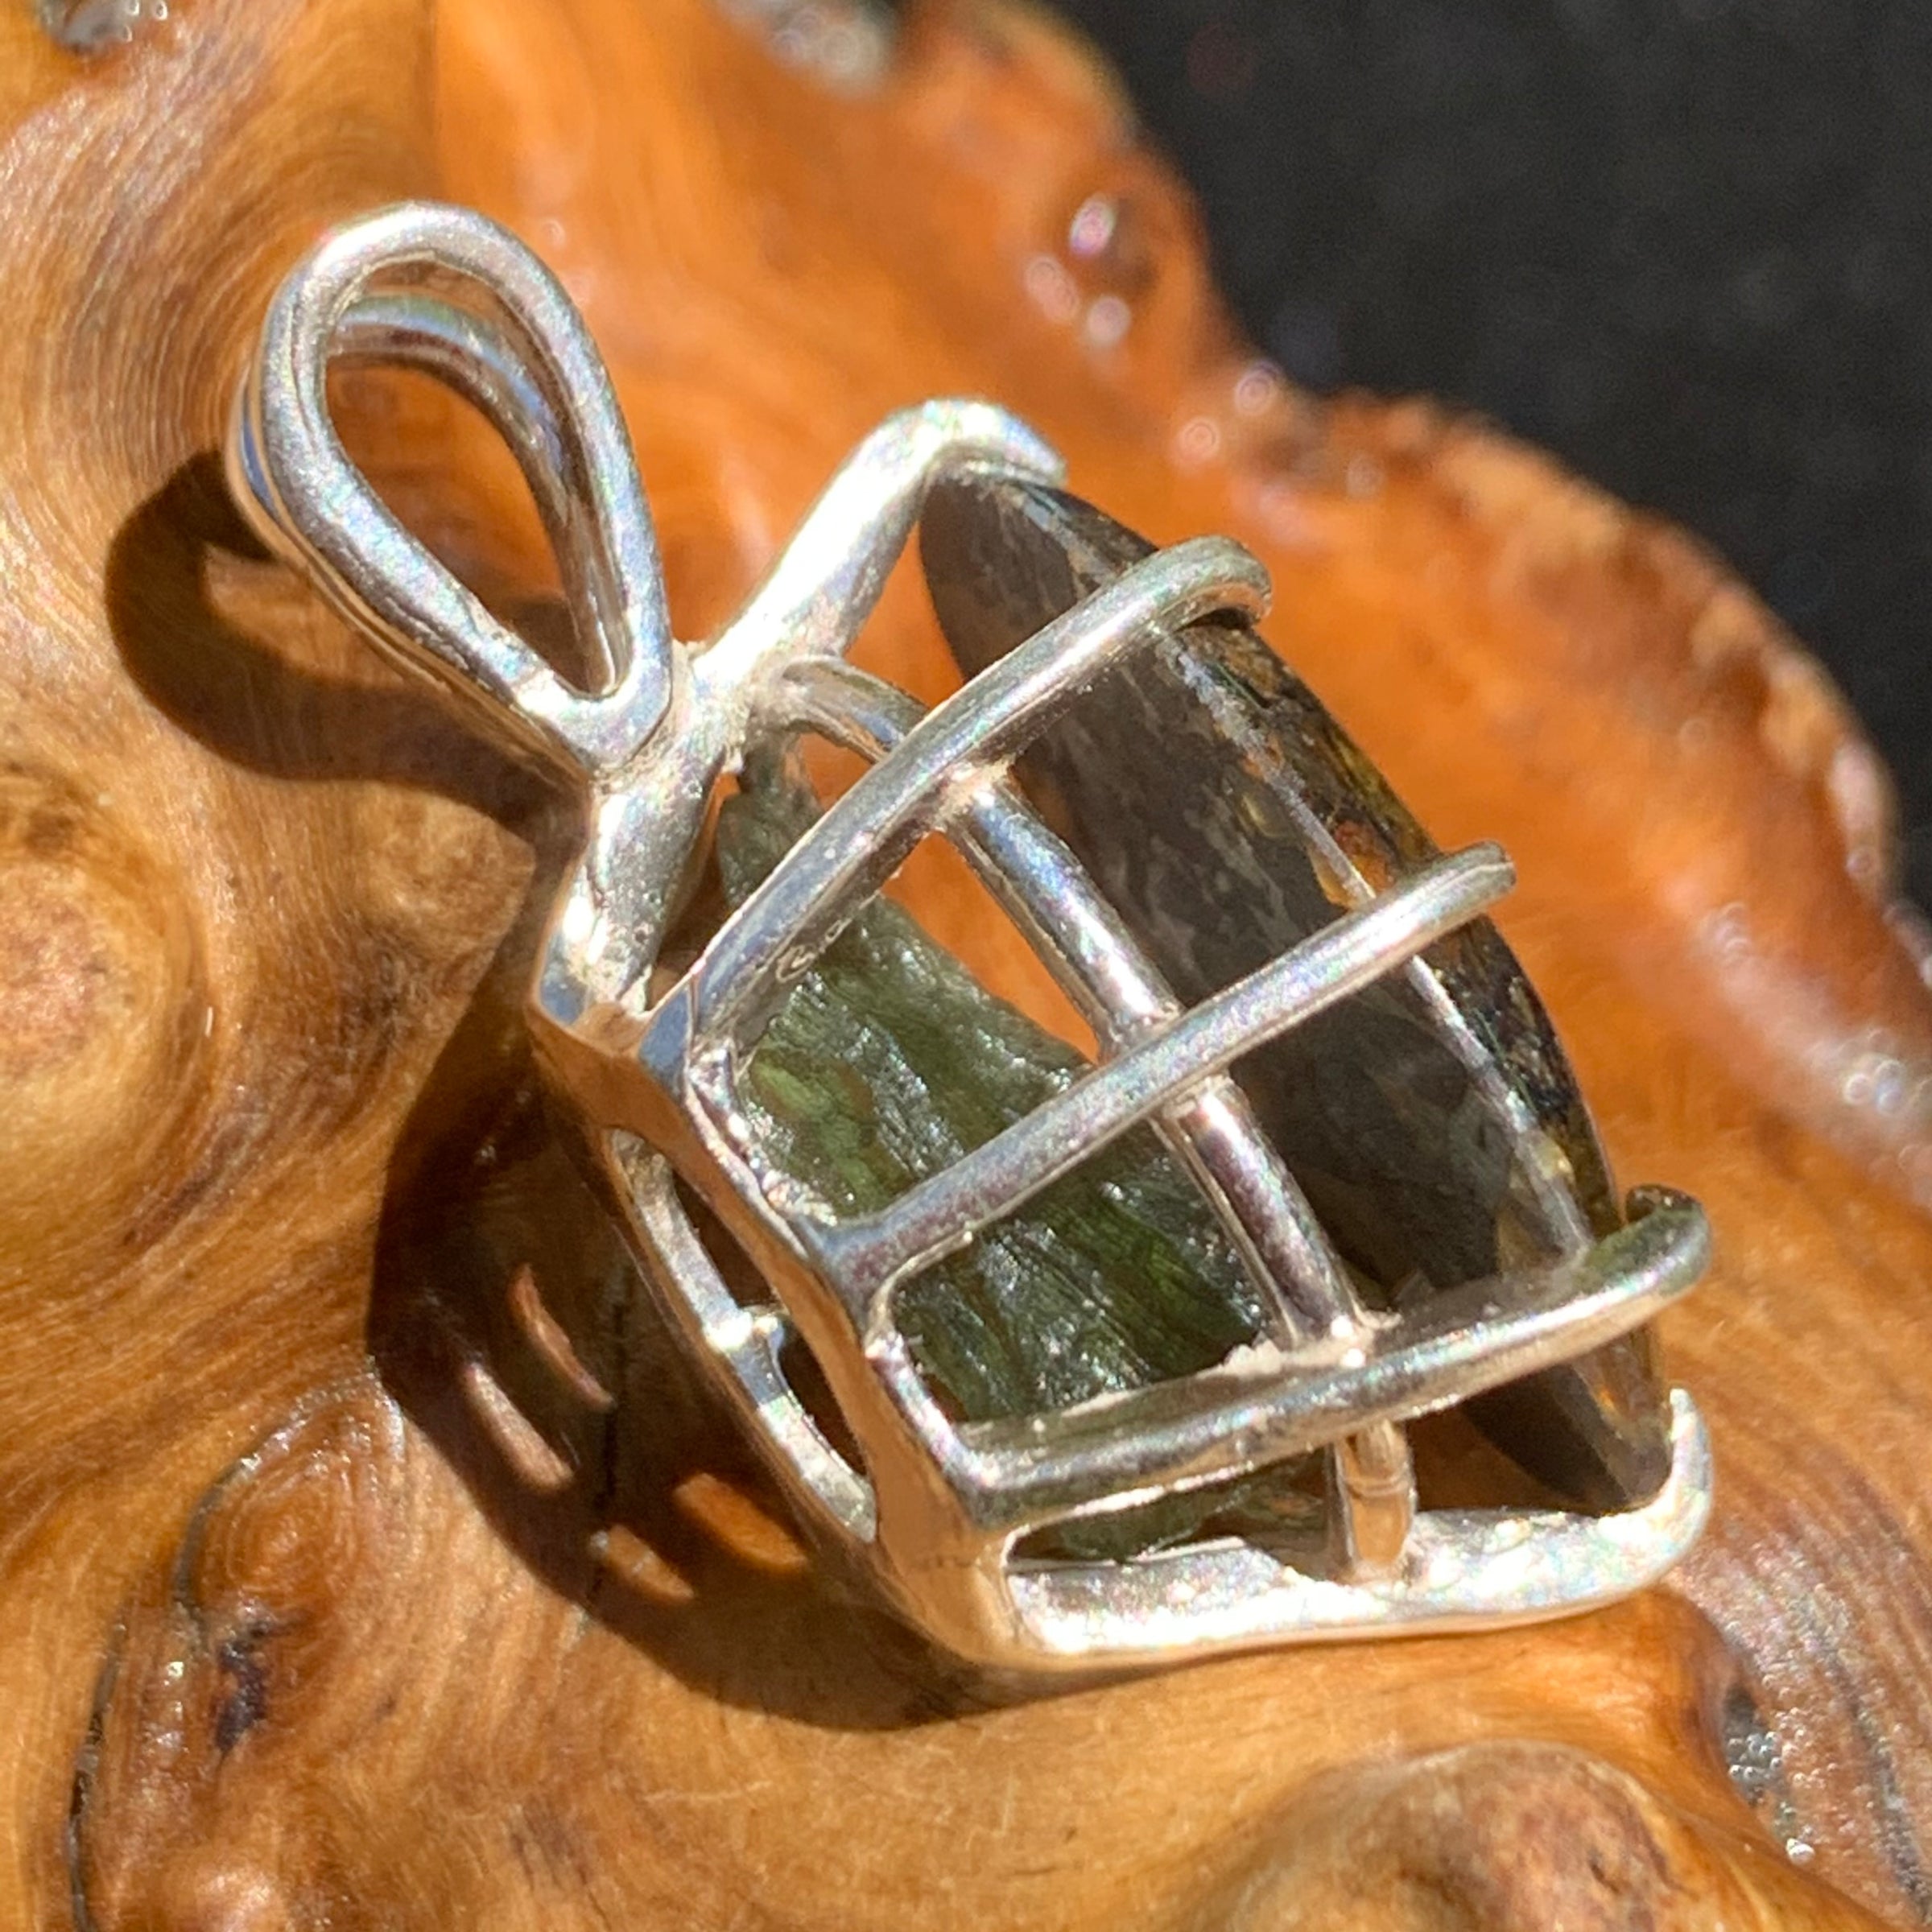 moldavite shows through the side of a sterling silver sericho pallasite meteorite and raw moldavite tektite basket pendant sitting on driftwood for display